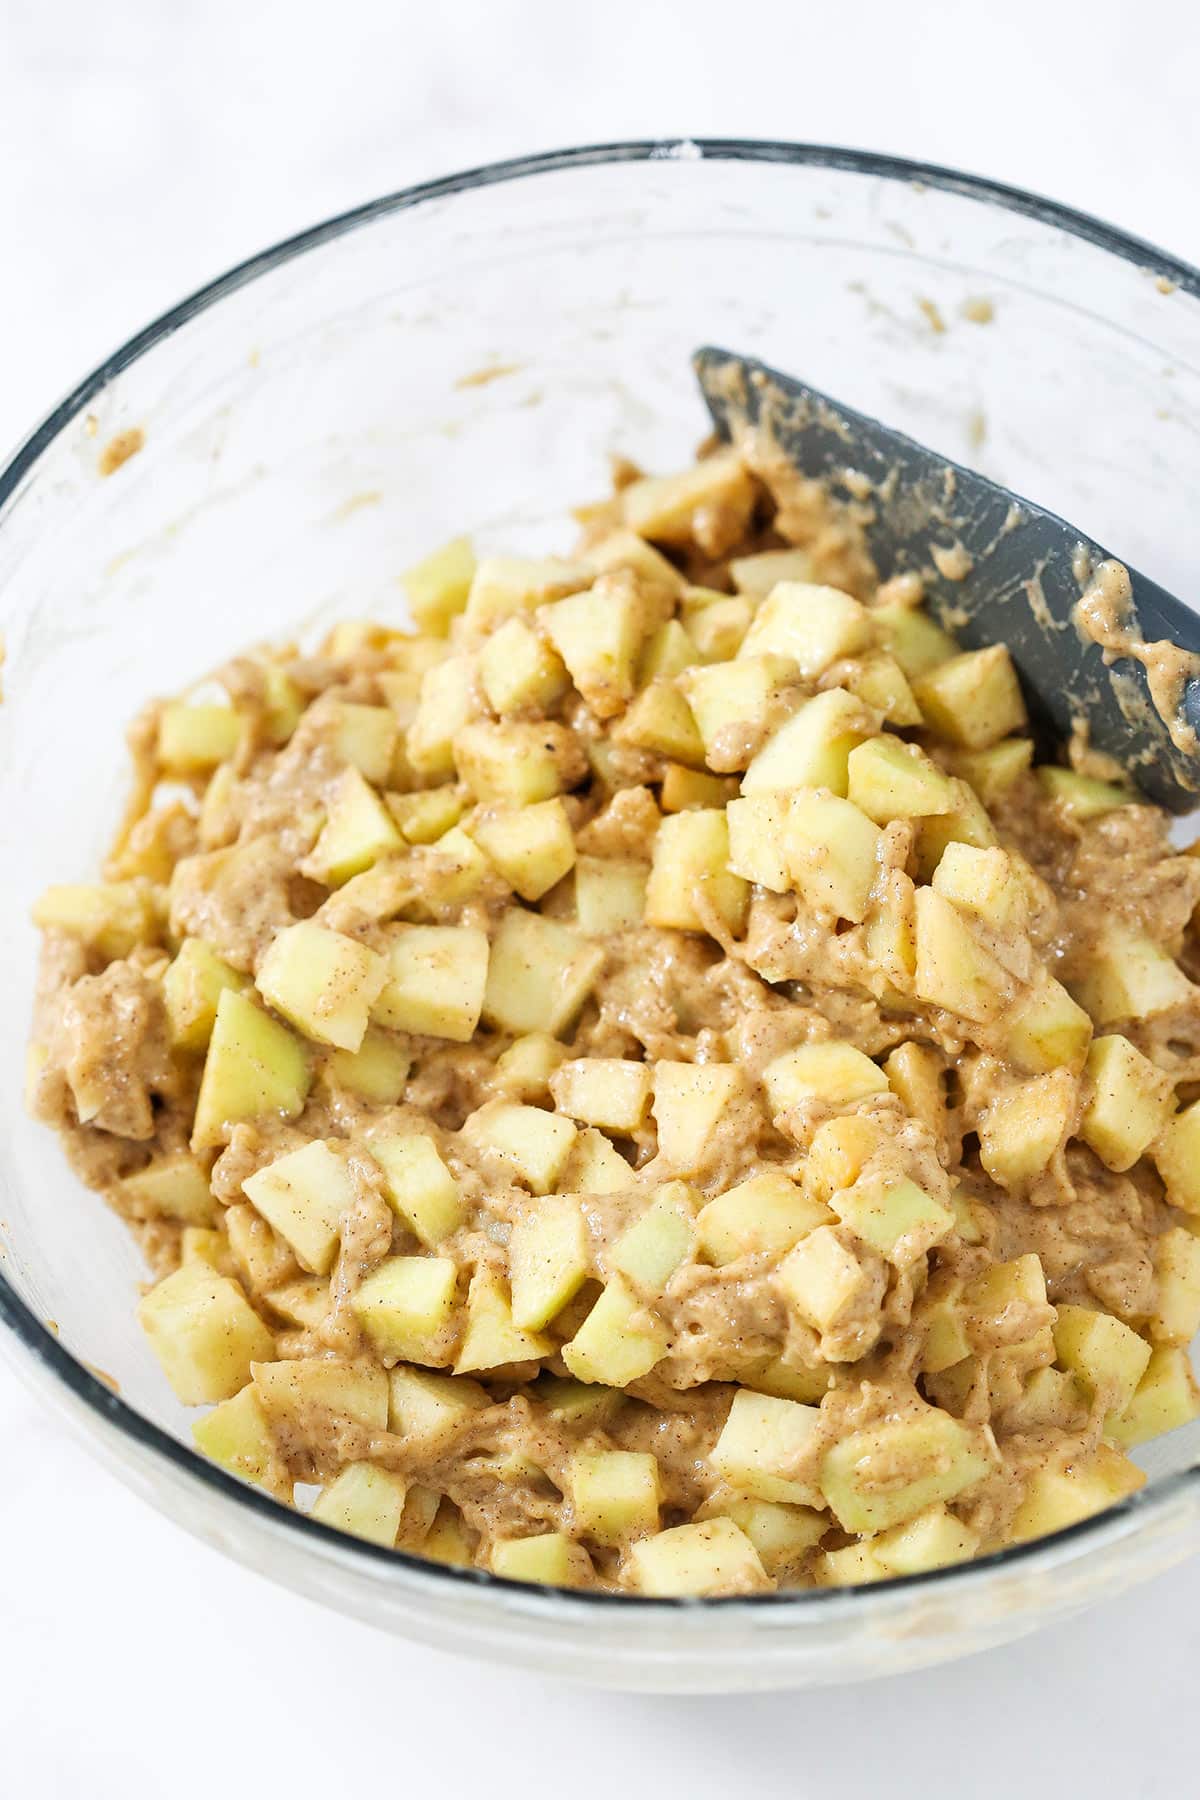 Chopped apples and butter being folded into the fritter batter with a rubber spatula